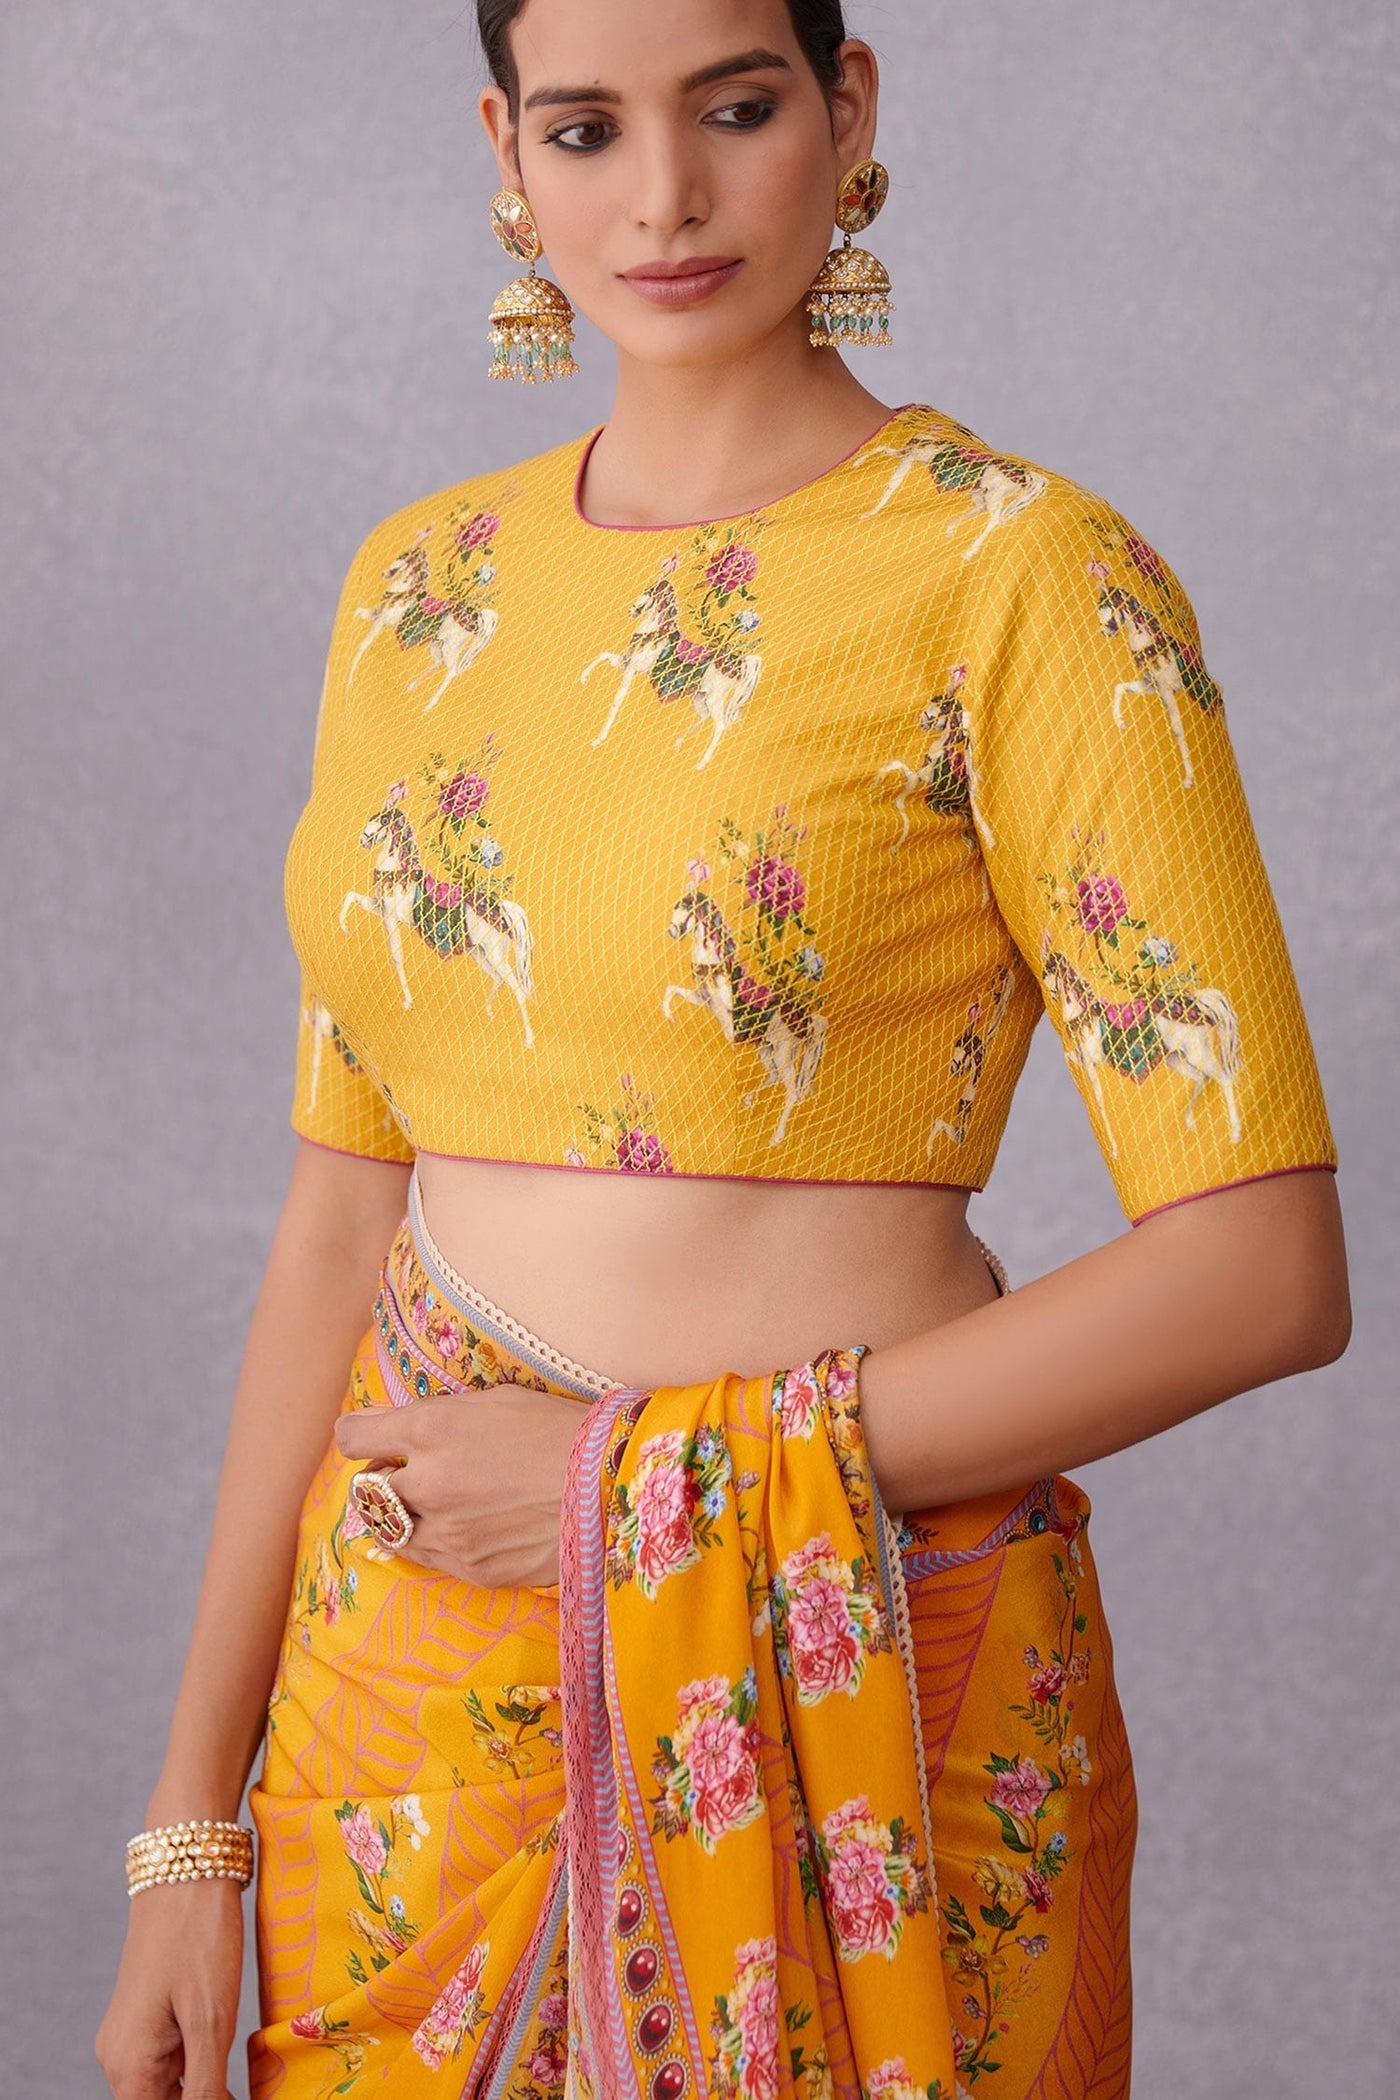 Sunehra Aashvani Blouse - Indian Clothing in Denver, CO, Aurora, CO, Boulder, CO, Fort Collins, CO, Colorado Springs, CO, Parker, CO, Highlands Ranch, CO, Cherry Creek, CO, Centennial, CO, and Longmont, CO. Nationwide shipping USA - India Fashion X